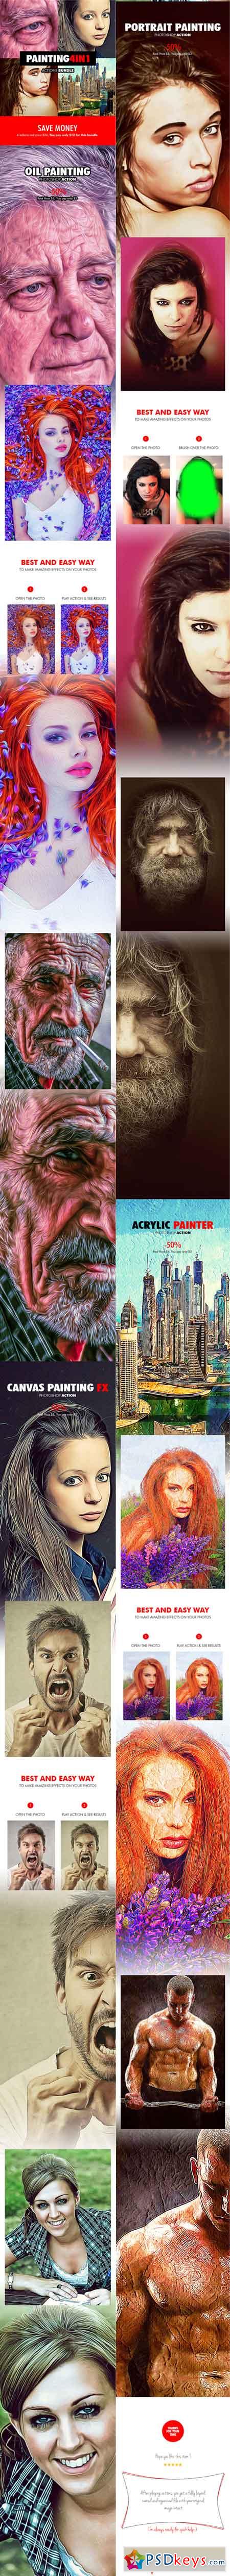 Painting - 4in1 Photoshop Actions Bundle V.1 18177924